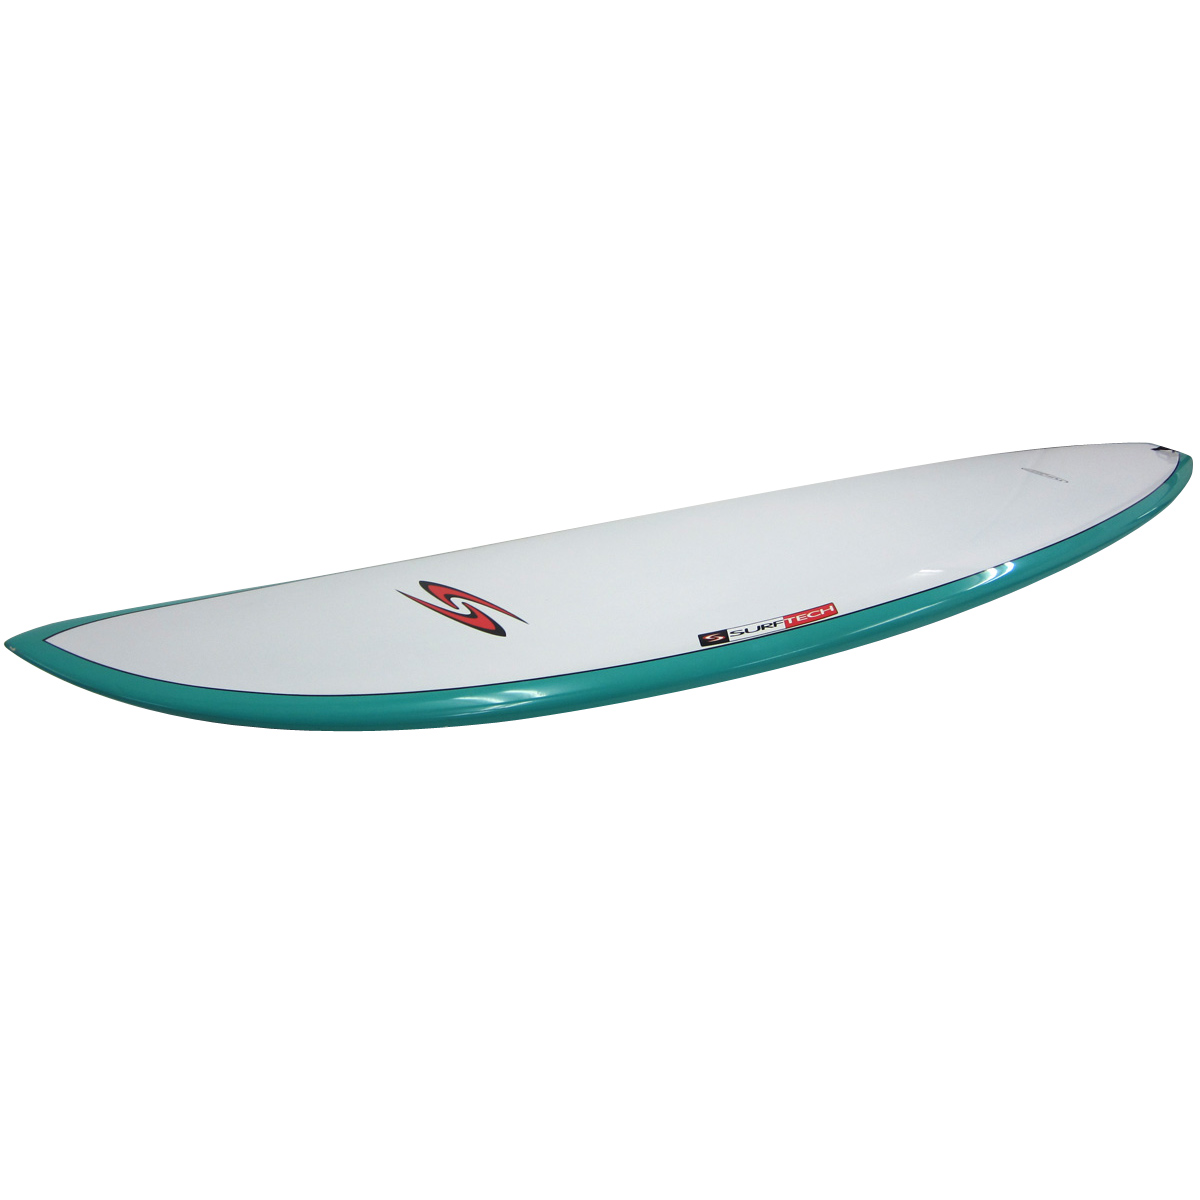 Randy French / 8`0 Squash Surftech 